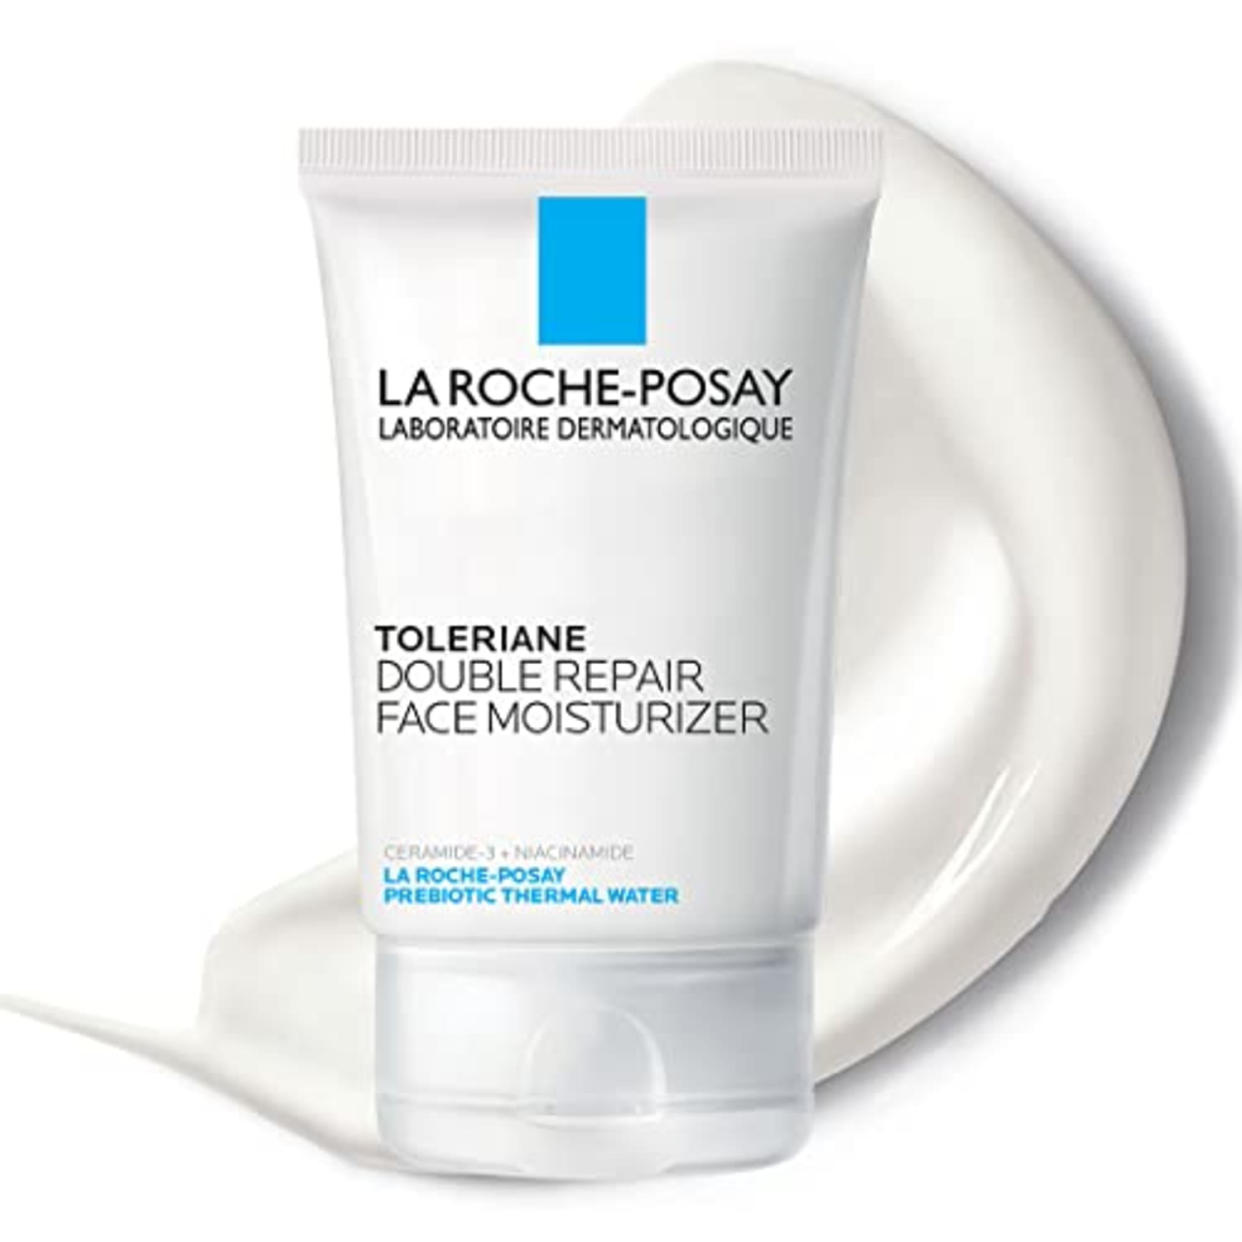 La Roche-Posay Toleriane Double Repair Face Moisturizer, Daily Moisturizer Face Cream with Ceramide and Niacinamide for All Skin Types, Oil Free, Fragrance Free (AMAZON)